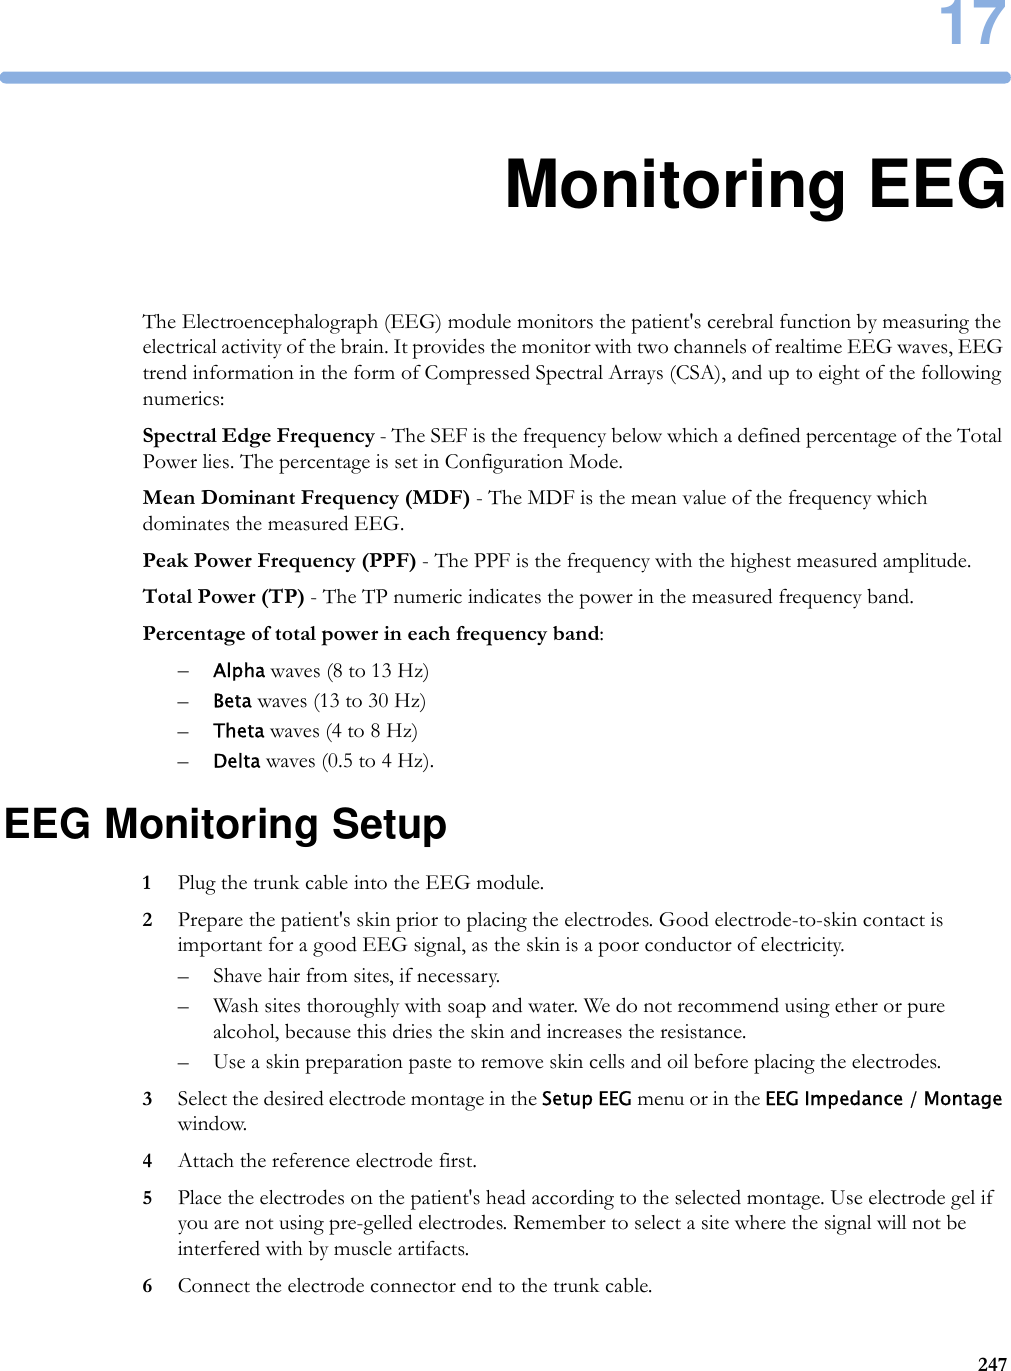 1724717Monitoring EEGThe Electroencephalograph (EEG) module monitors the patient&apos;s cerebral function by measuring the electrical activity of the brain. It provides the monitor with two channels of realtime EEG waves, EEG trend information in the form of Compressed Spectral Arrays (CSA), and up to eight of the following numerics:Spectral Edge Frequency - The SEF is the frequency below which a defined percentage of the Total Power lies. The percentage is set in Configuration Mode.Mean Dominant Frequency (MDF) - The MDF is the mean value of the frequency which dominates the measured EEG.Peak Power Frequency (PPF) - The PPF is the frequency with the highest measured amplitude.Total Power (TP) - The TP numeric indicates the power in the measured frequency band.Percentage of total power in each frequency band:–Alpha waves (8 to 13 Hz)–Beta waves (13 to 30 Hz)–Theta waves (4 to 8 Hz)–Delta waves (0.5 to 4 Hz).EEG Monitoring Setup1Plug the trunk cable into the EEG module.2Prepare the patient&apos;s skin prior to placing the electrodes. Good electrode-to-skin contact is important for a good EEG signal, as the skin is a poor conductor of electricity.– Shave hair from sites, if necessary.– Wash sites thoroughly with soap and water. We do not recommend using ether or pure alcohol, because this dries the skin and increases the resistance.– Use a skin preparation paste to remove skin cells and oil before placing the electrodes.3Select the desired electrode montage in the Setup EEG menu or in the EEG Impedance / Montage window.4Attach the reference electrode first.5Place the electrodes on the patient&apos;s head according to the selected montage. Use electrode gel if you are not using pre-gelled electrodes. Remember to select a site where the signal will not be interfered with by muscle artifacts.6Connect the electrode connector end to the trunk cable.